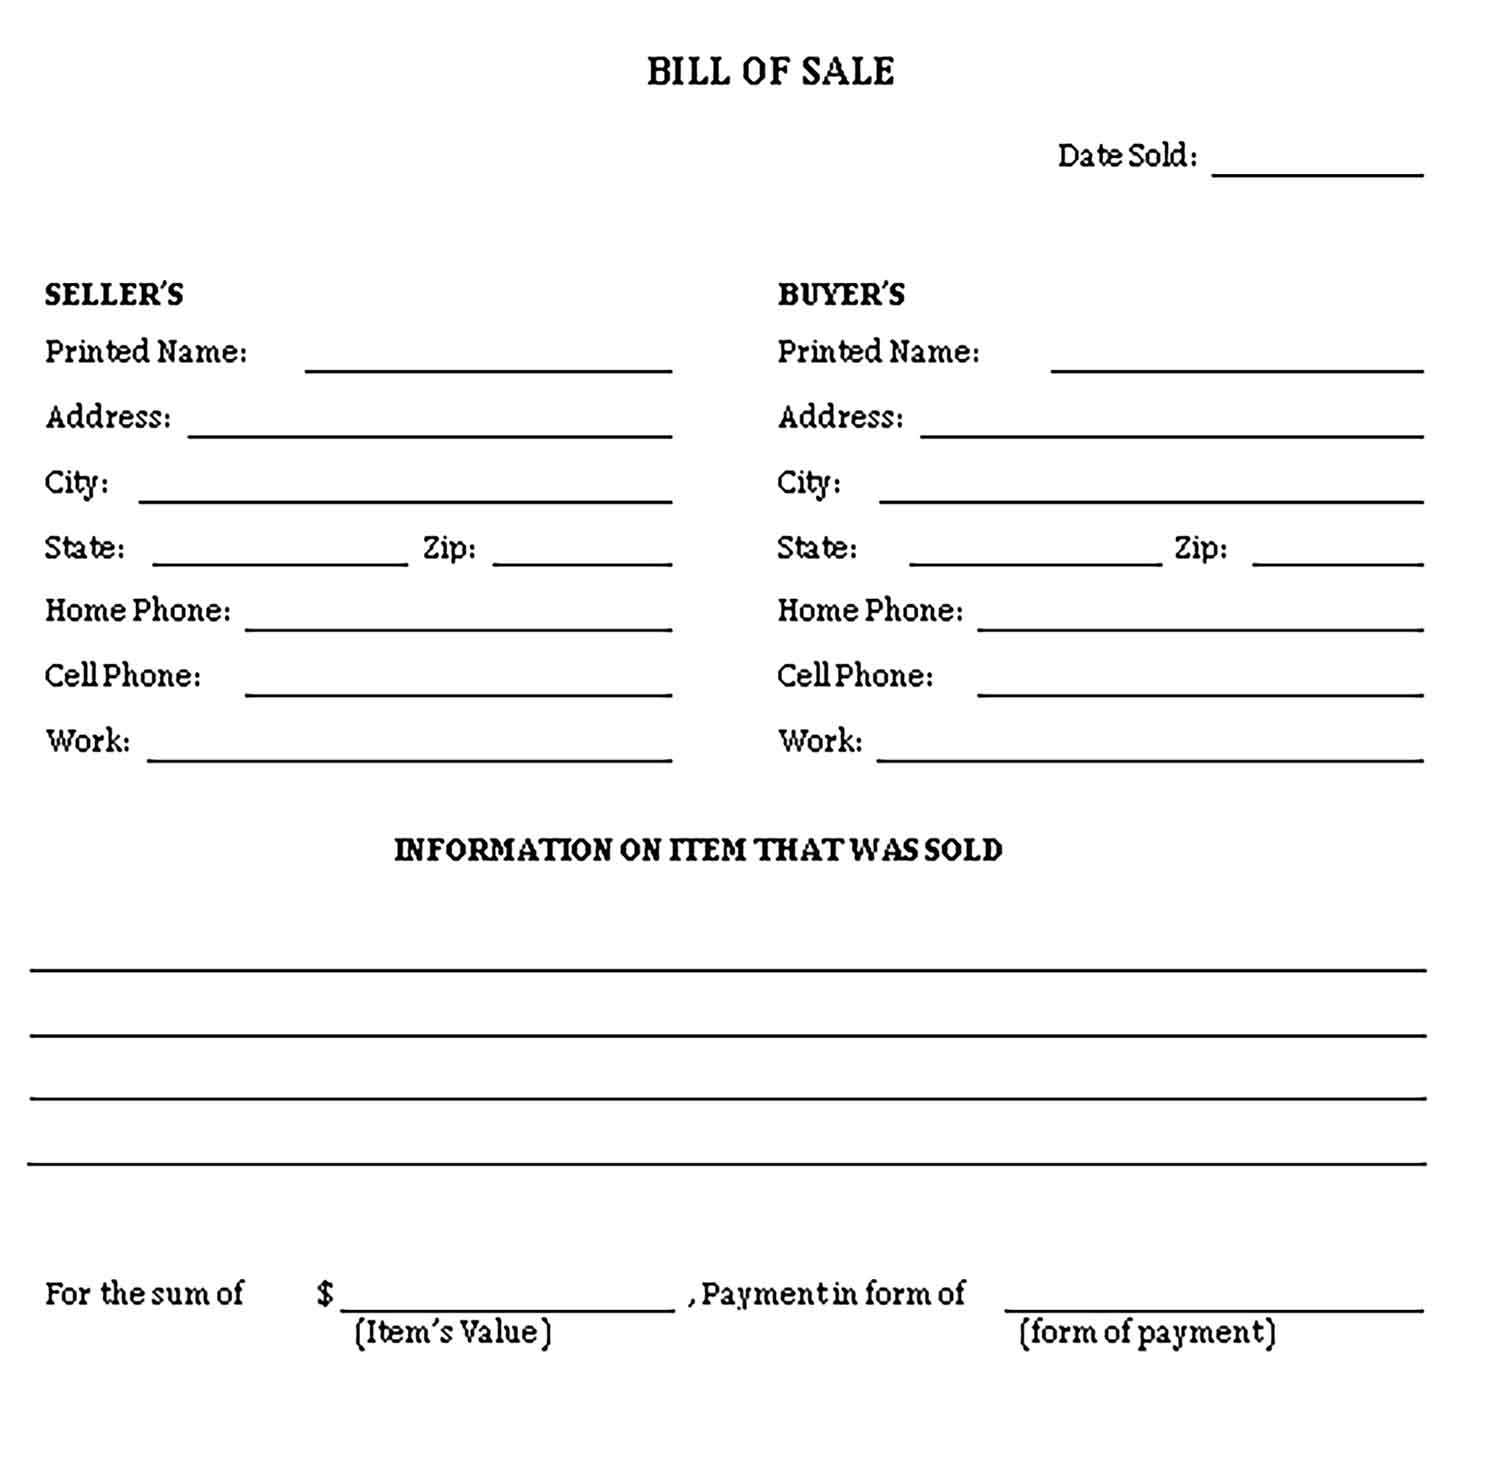 Sample general bill of sale form Templates 1